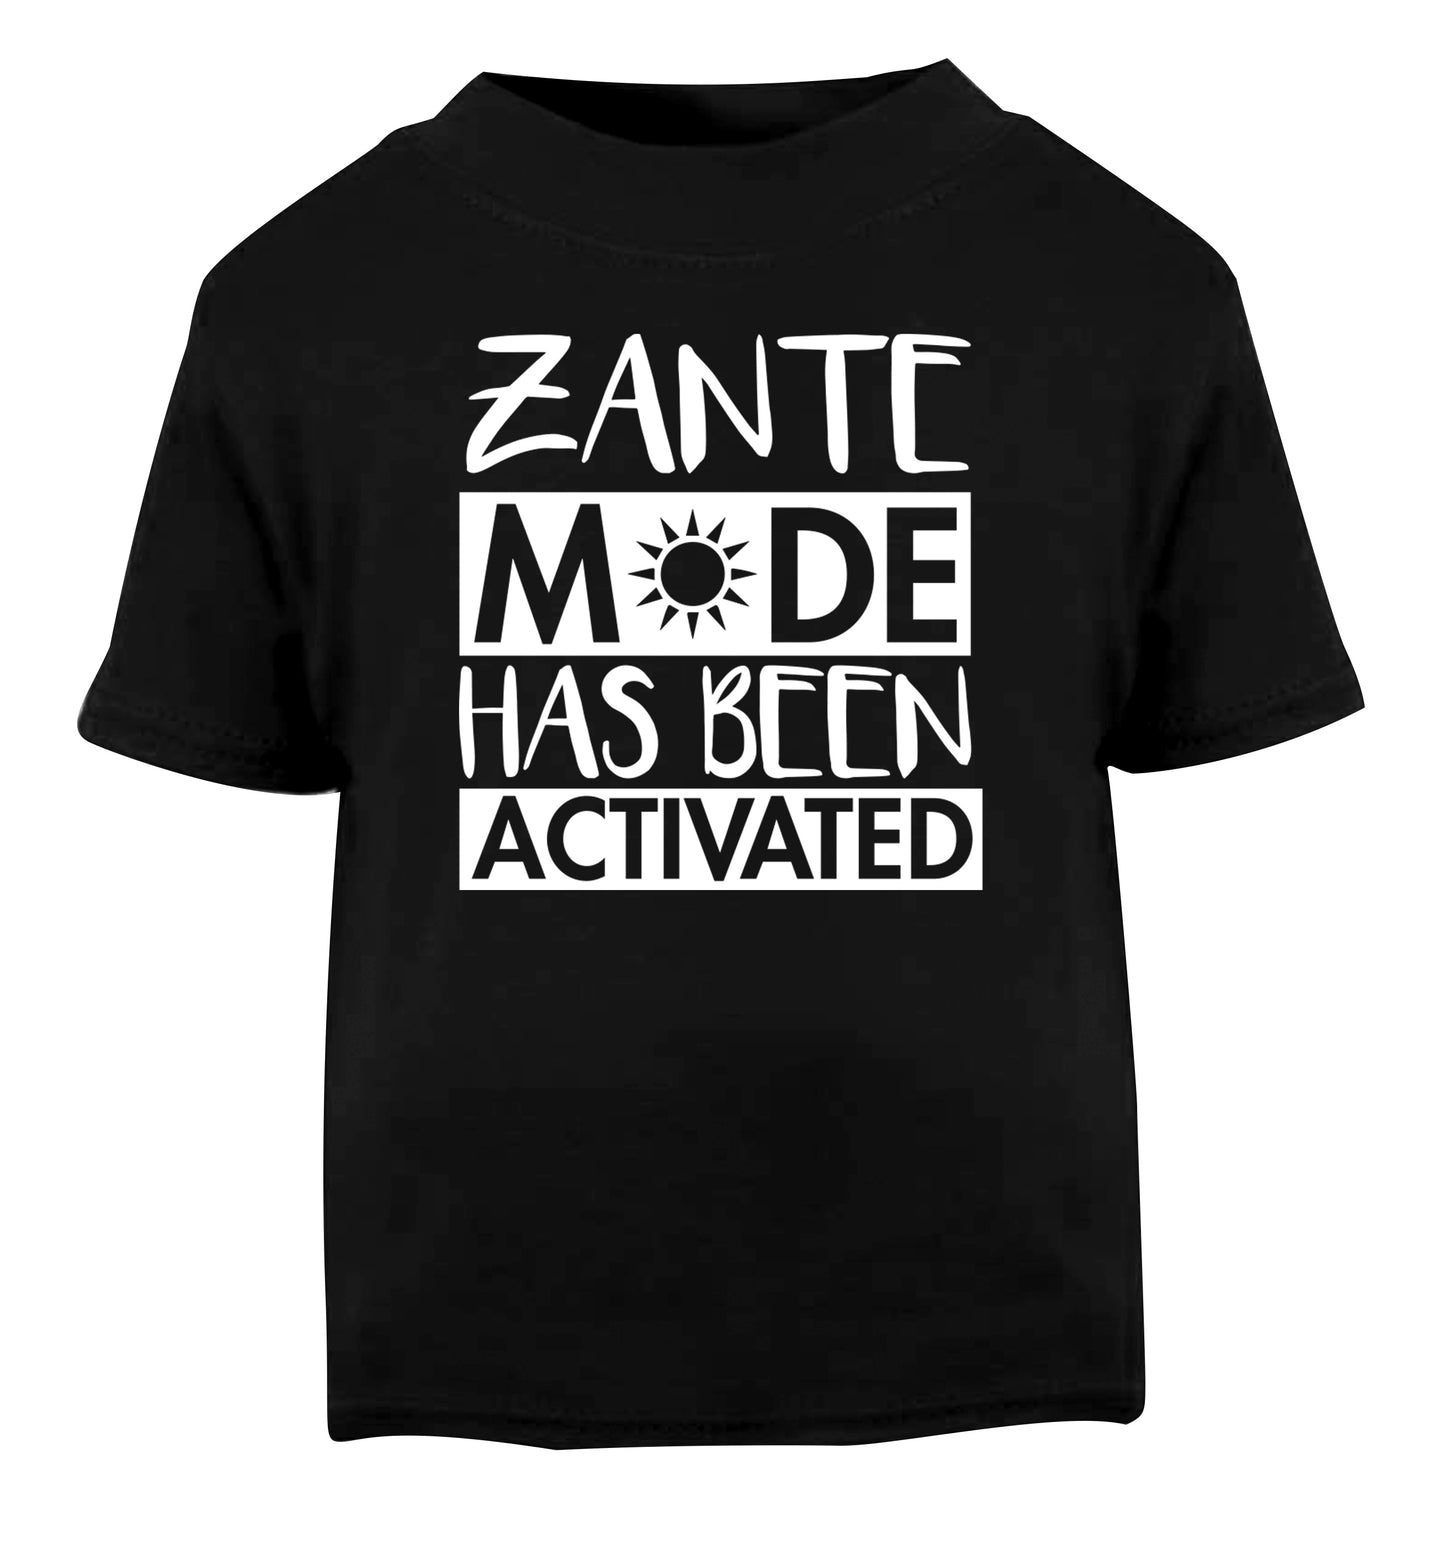 Zante mode has been activated Black Baby Toddler Tshirt 2 years